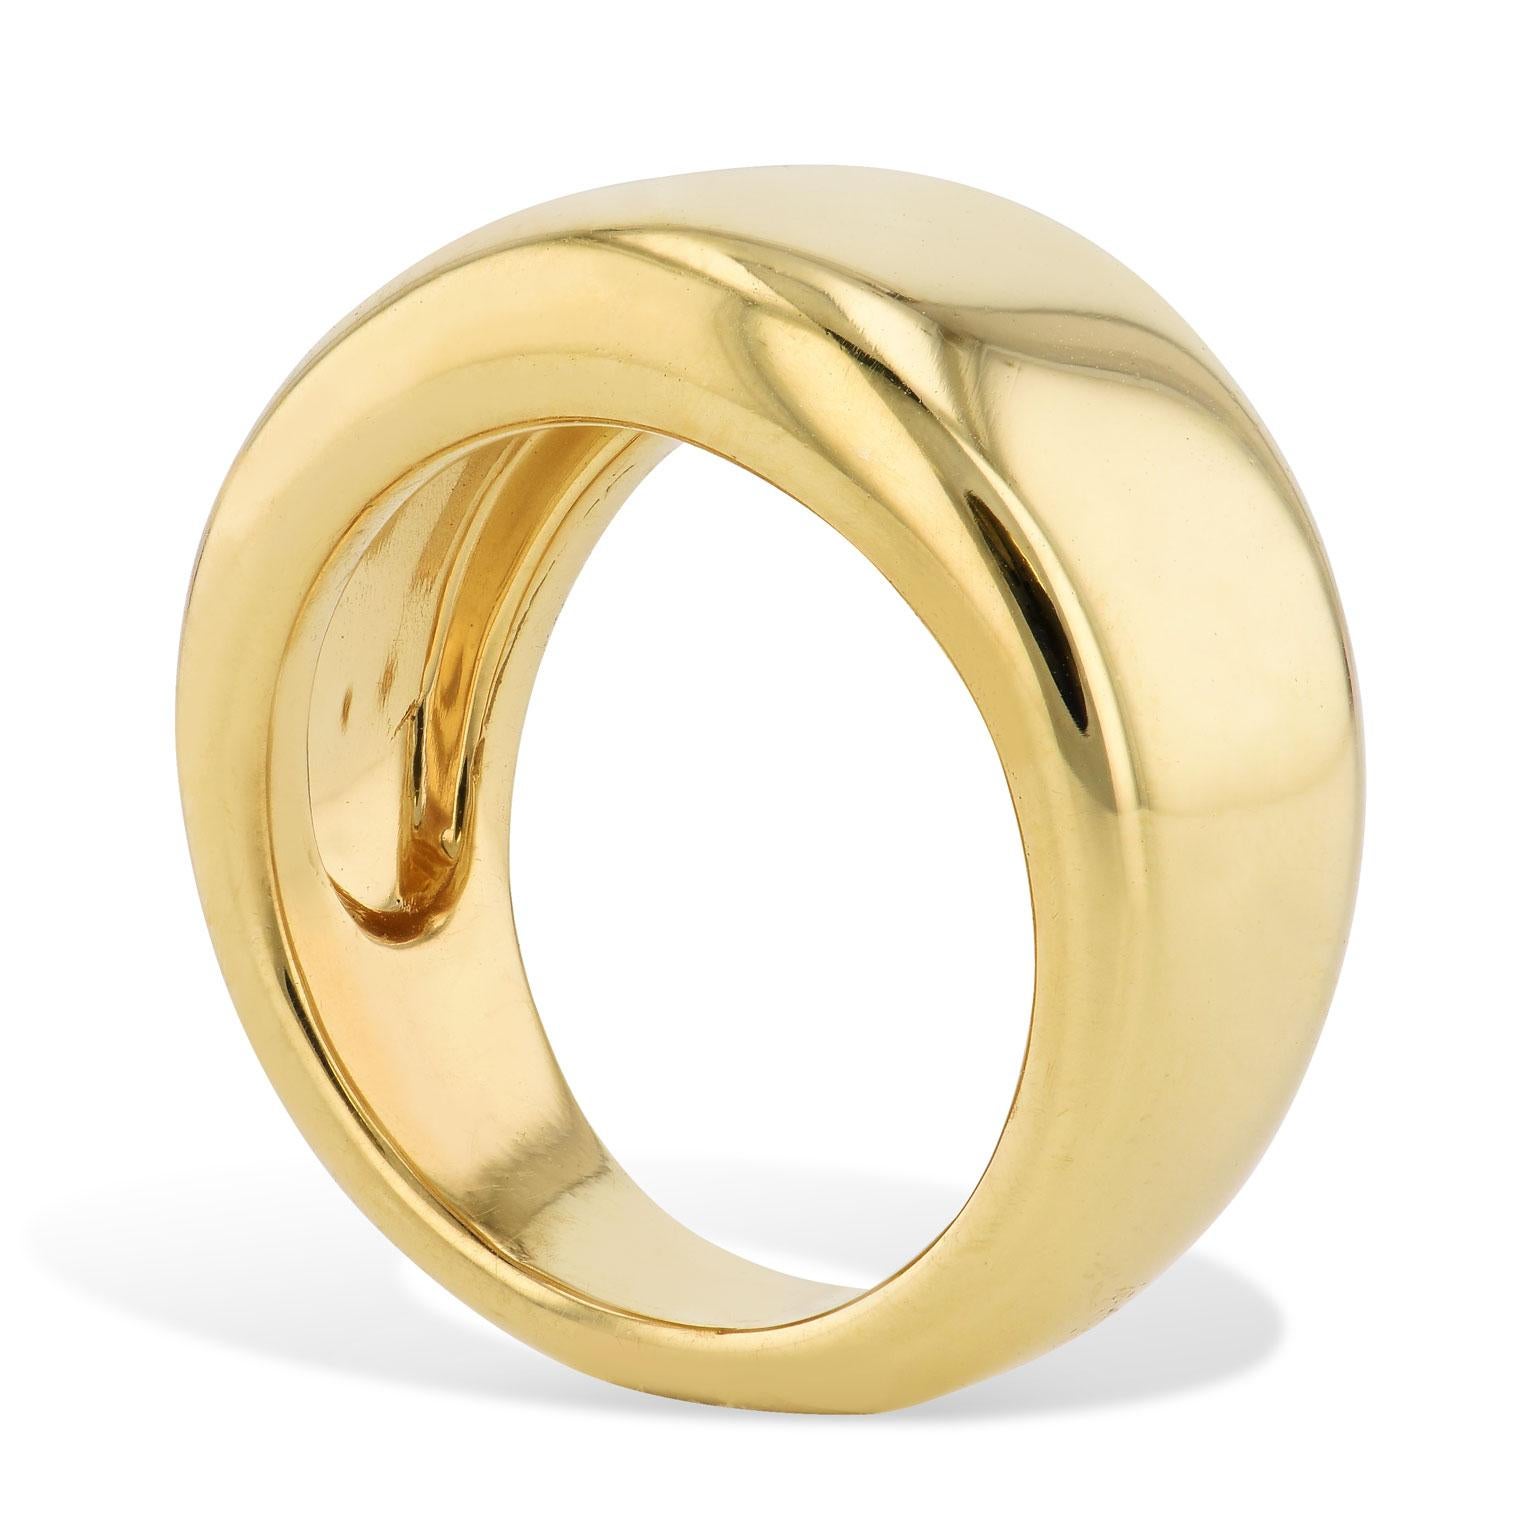 H&H 18 Karat Yellow Gold Designer Band Ring

This is a handmade, one of a kind ring by H&H Jewels.

This 18 karat yellow gold band ring is sleek and sumptuous as the smooth contours of the ring hug one’s finger. 
Enjoy the splendor of yellow gold